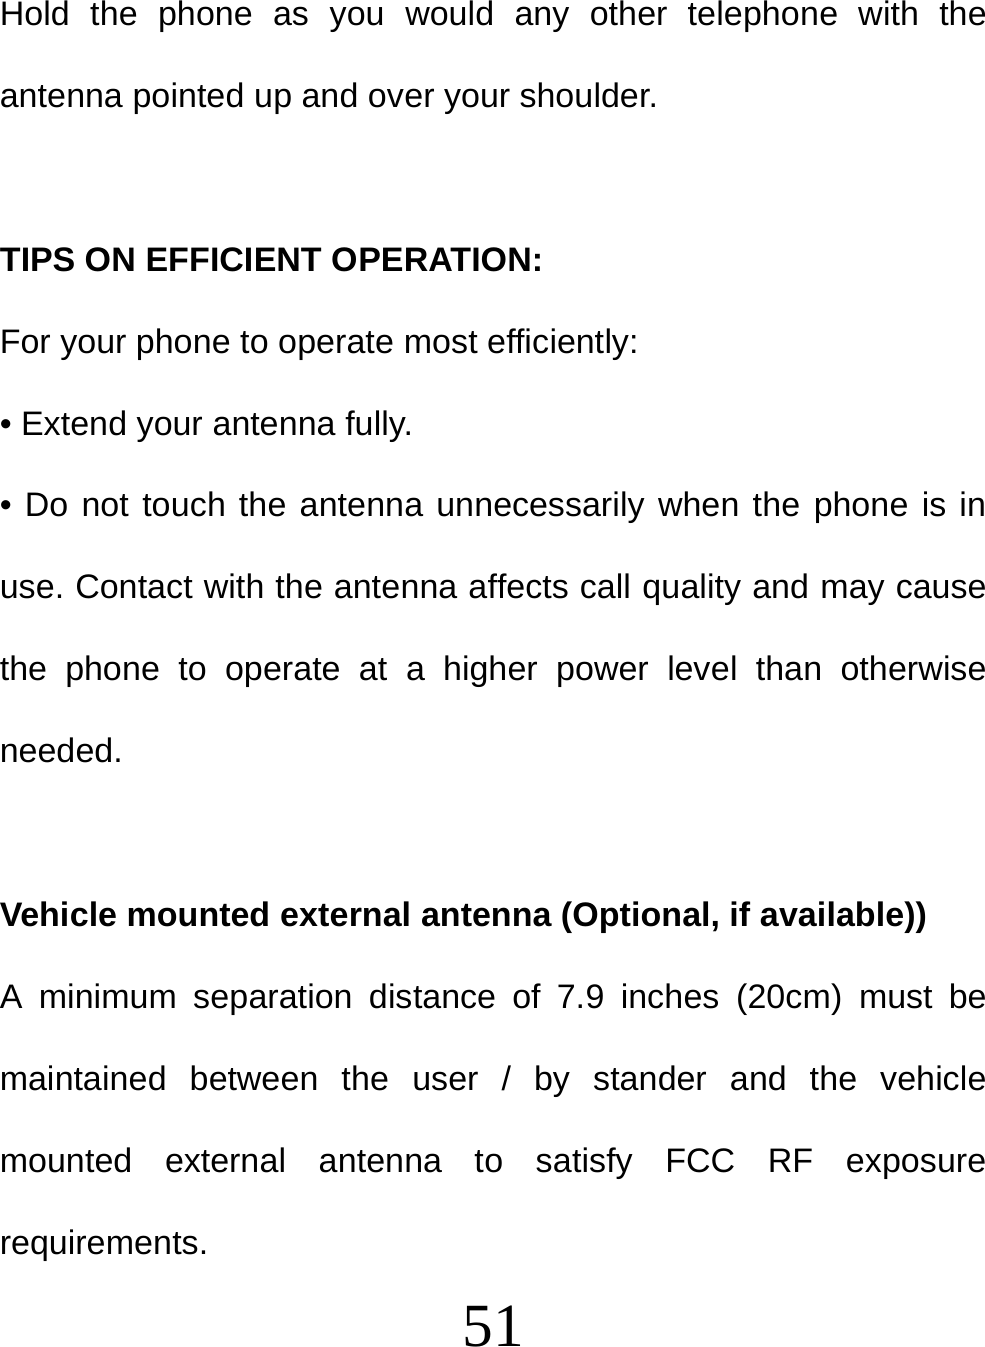  51 Hold the phone as you would any other telephone with the antenna pointed up and over your shoulder.   TIPS ON EFFICIENT OPERATION:  For your phone to operate most efficiently: • Extend your antenna fully. • Do not touch the antenna unnecessarily when the phone is in use. Contact with the antenna affects call quality and may cause the phone to operate at a higher power level than otherwise needed.  Vehicle mounted external antenna (Optional, if available)) A minimum separation distance of 7.9 inches (20cm) must be maintained between the user / by stander and the vehicle mounted external antenna to satisfy FCC RF exposure requirements. 